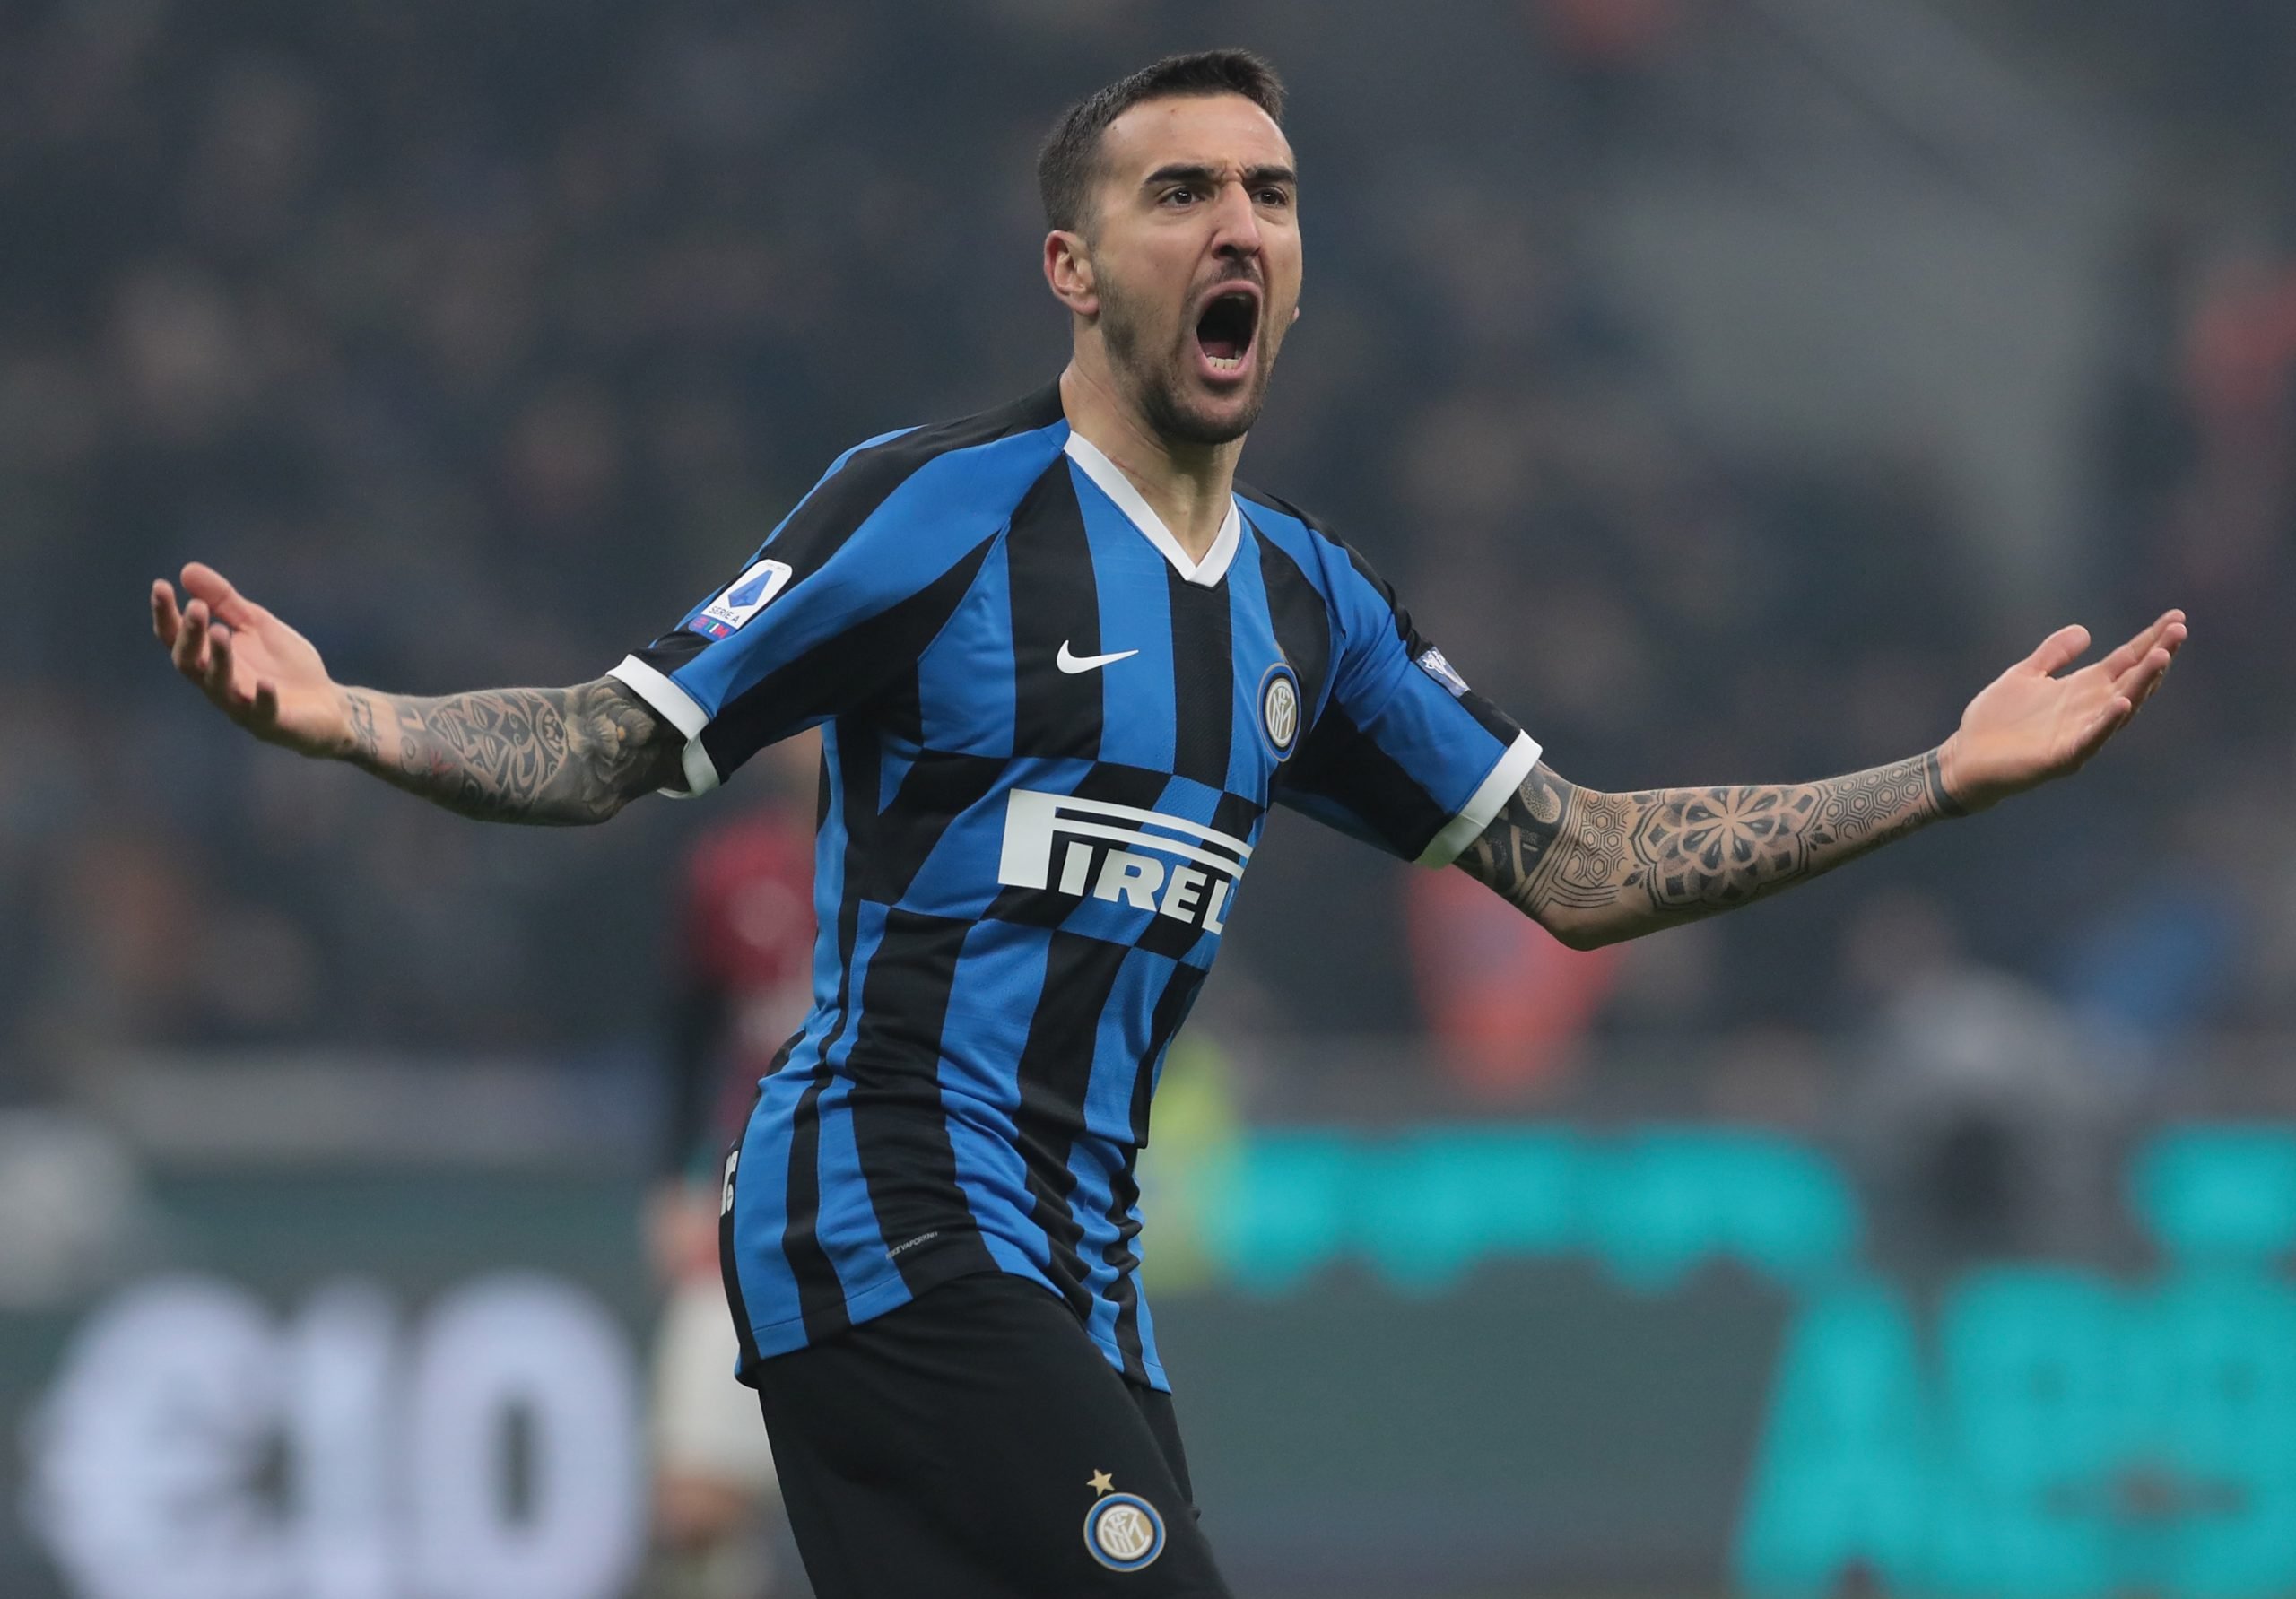 Tottenham Hotspur have been given another shot to sign Vecino who is celebrating in the photo